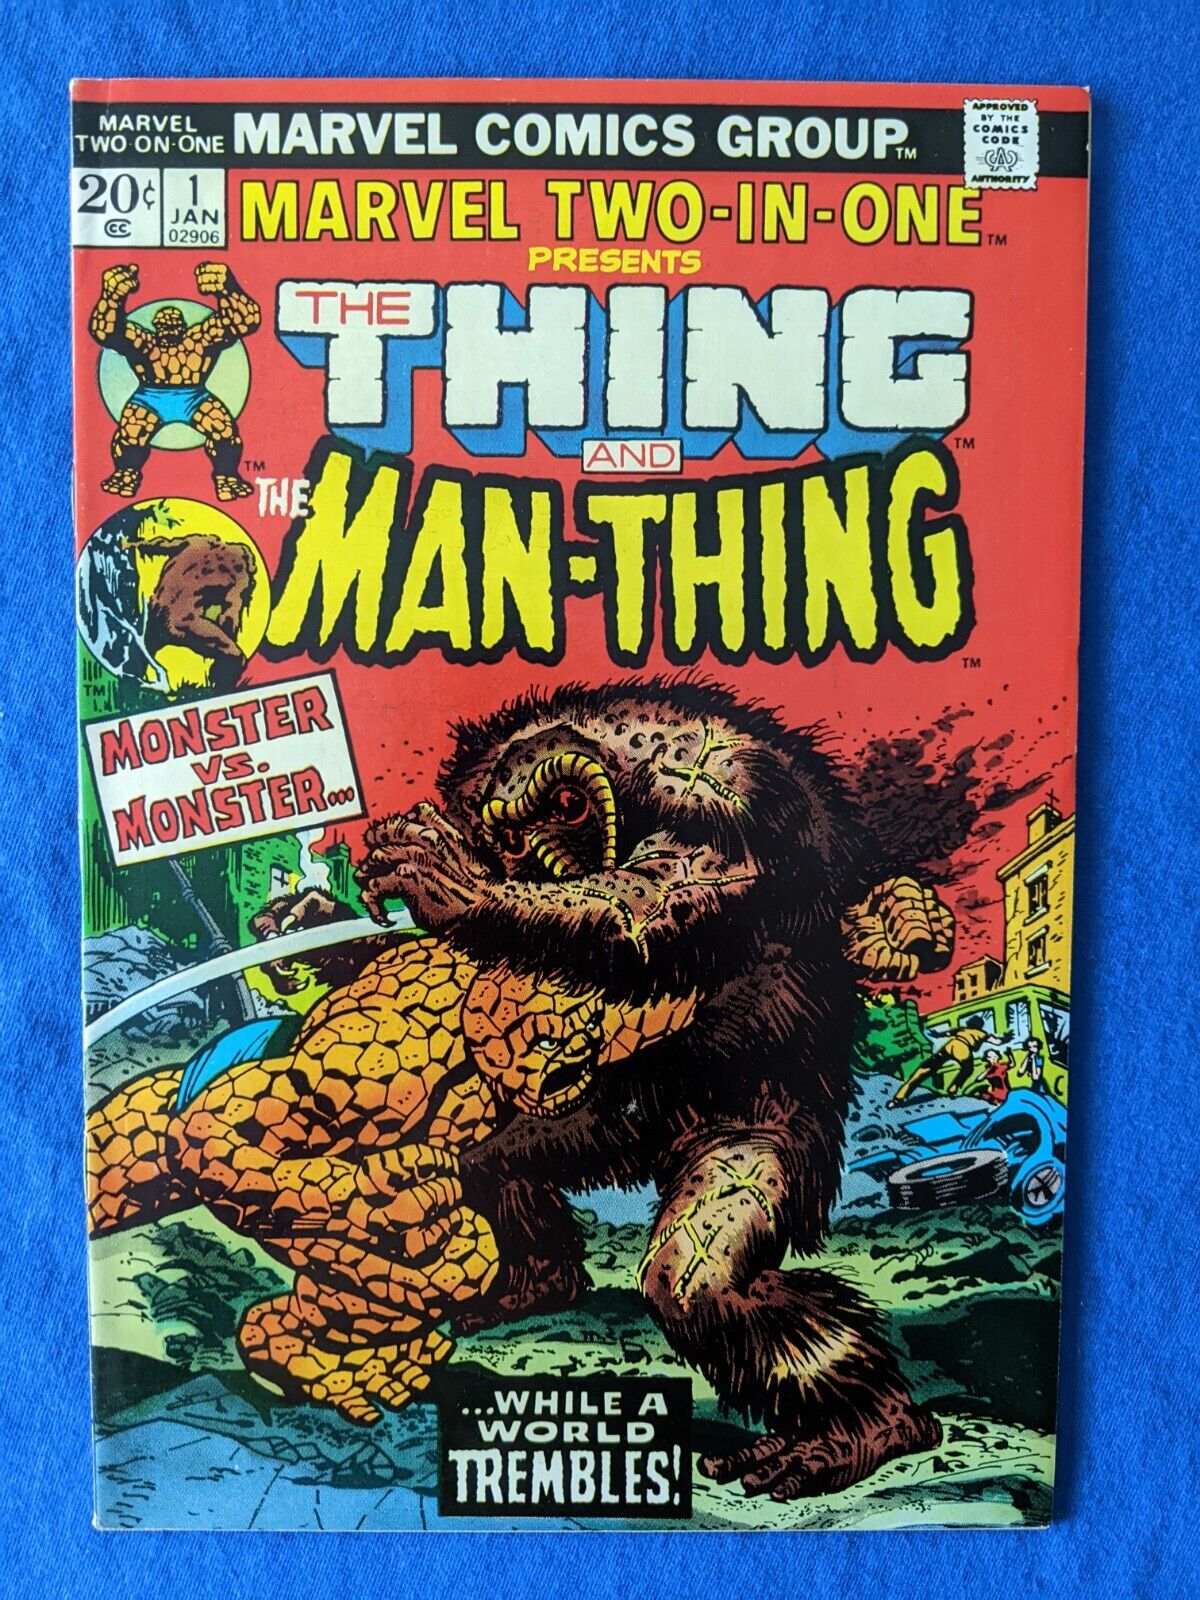 MARVEL TWO-IN-ONE #1 (Jan 1973) Marvel Bronze age classic, first issue.